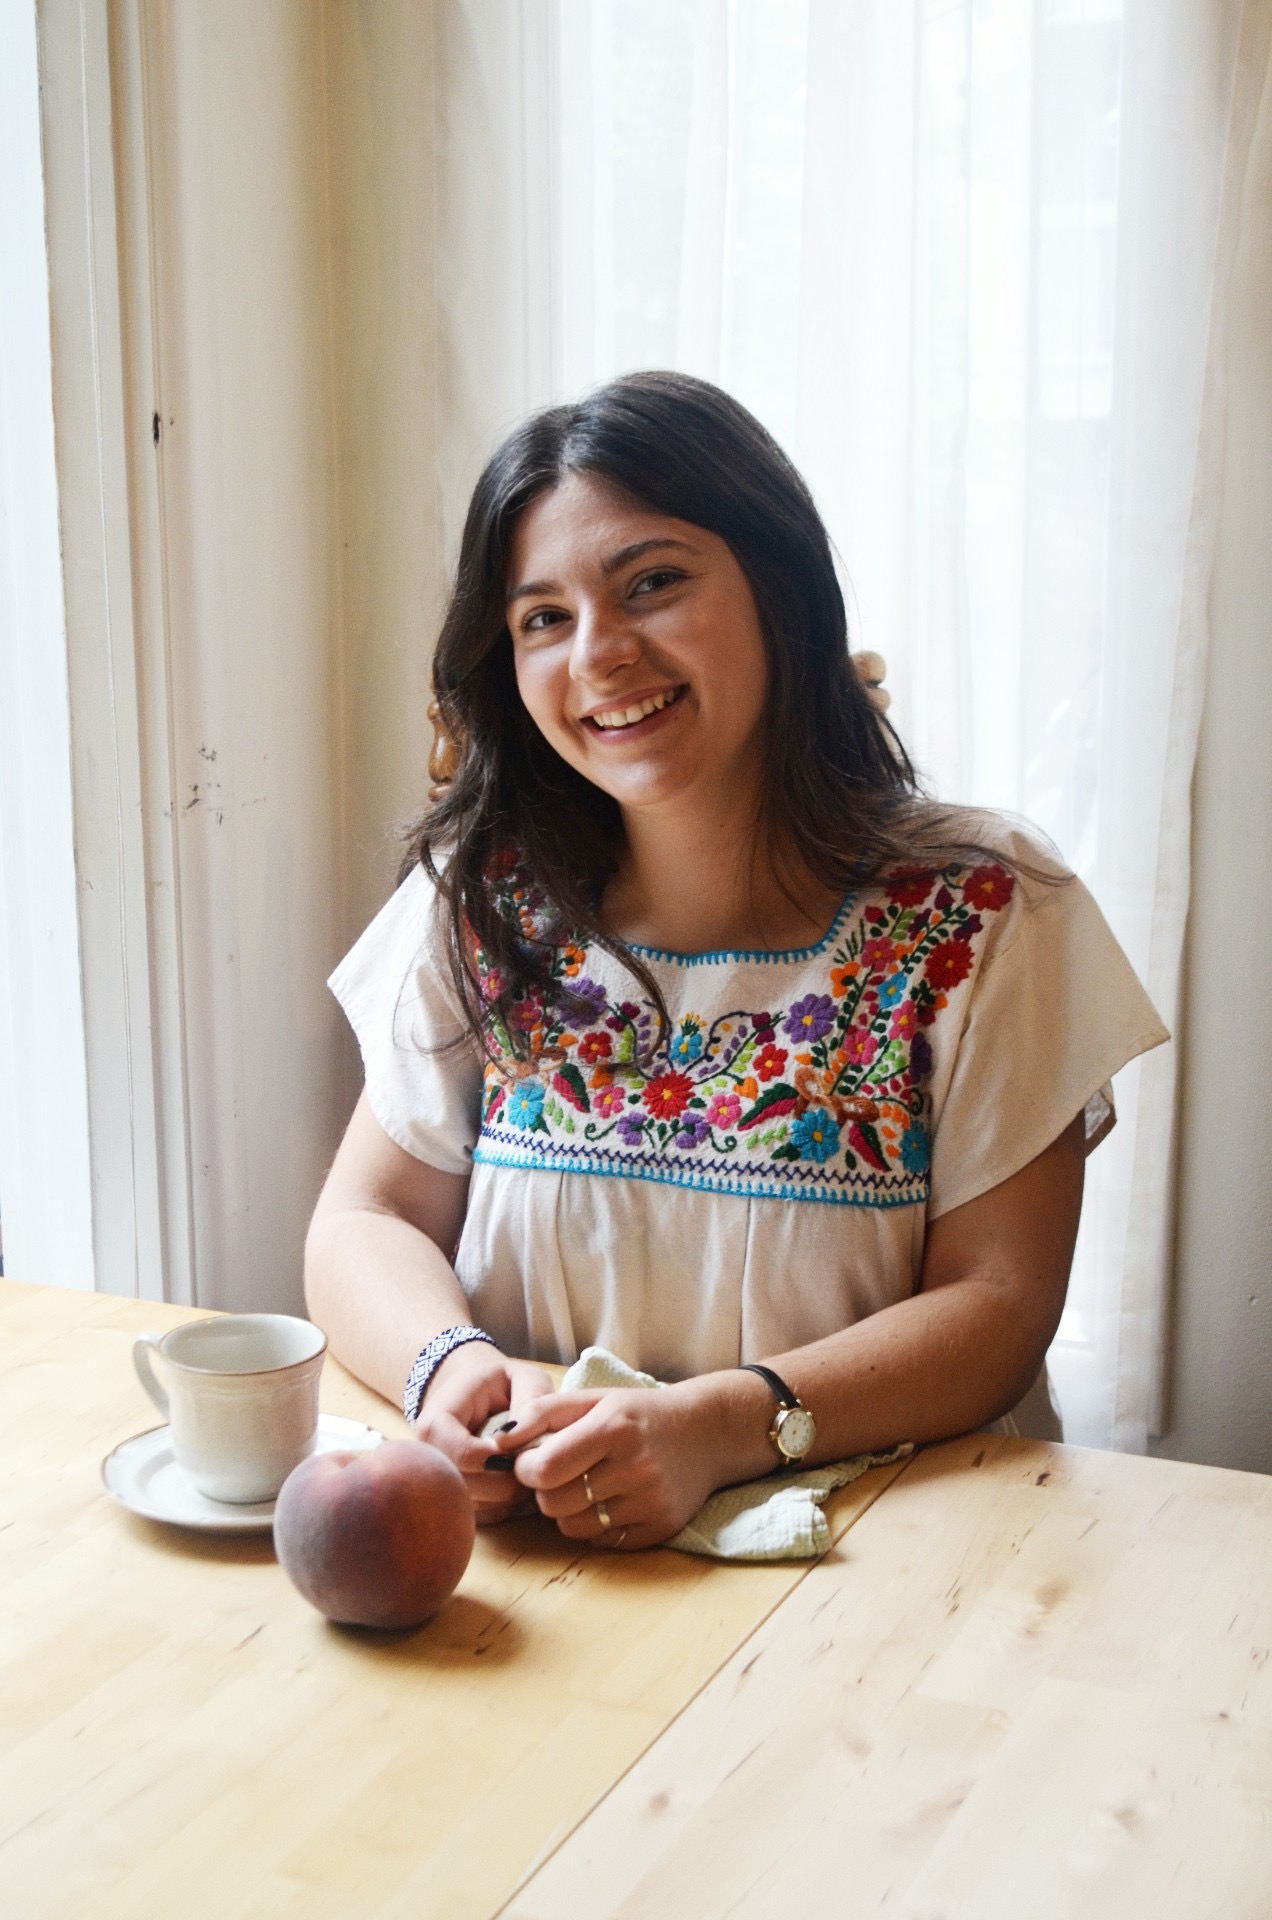 Serafima wearing an embroidered top sitting in soft natural light at a table with a coffee cup and a peach